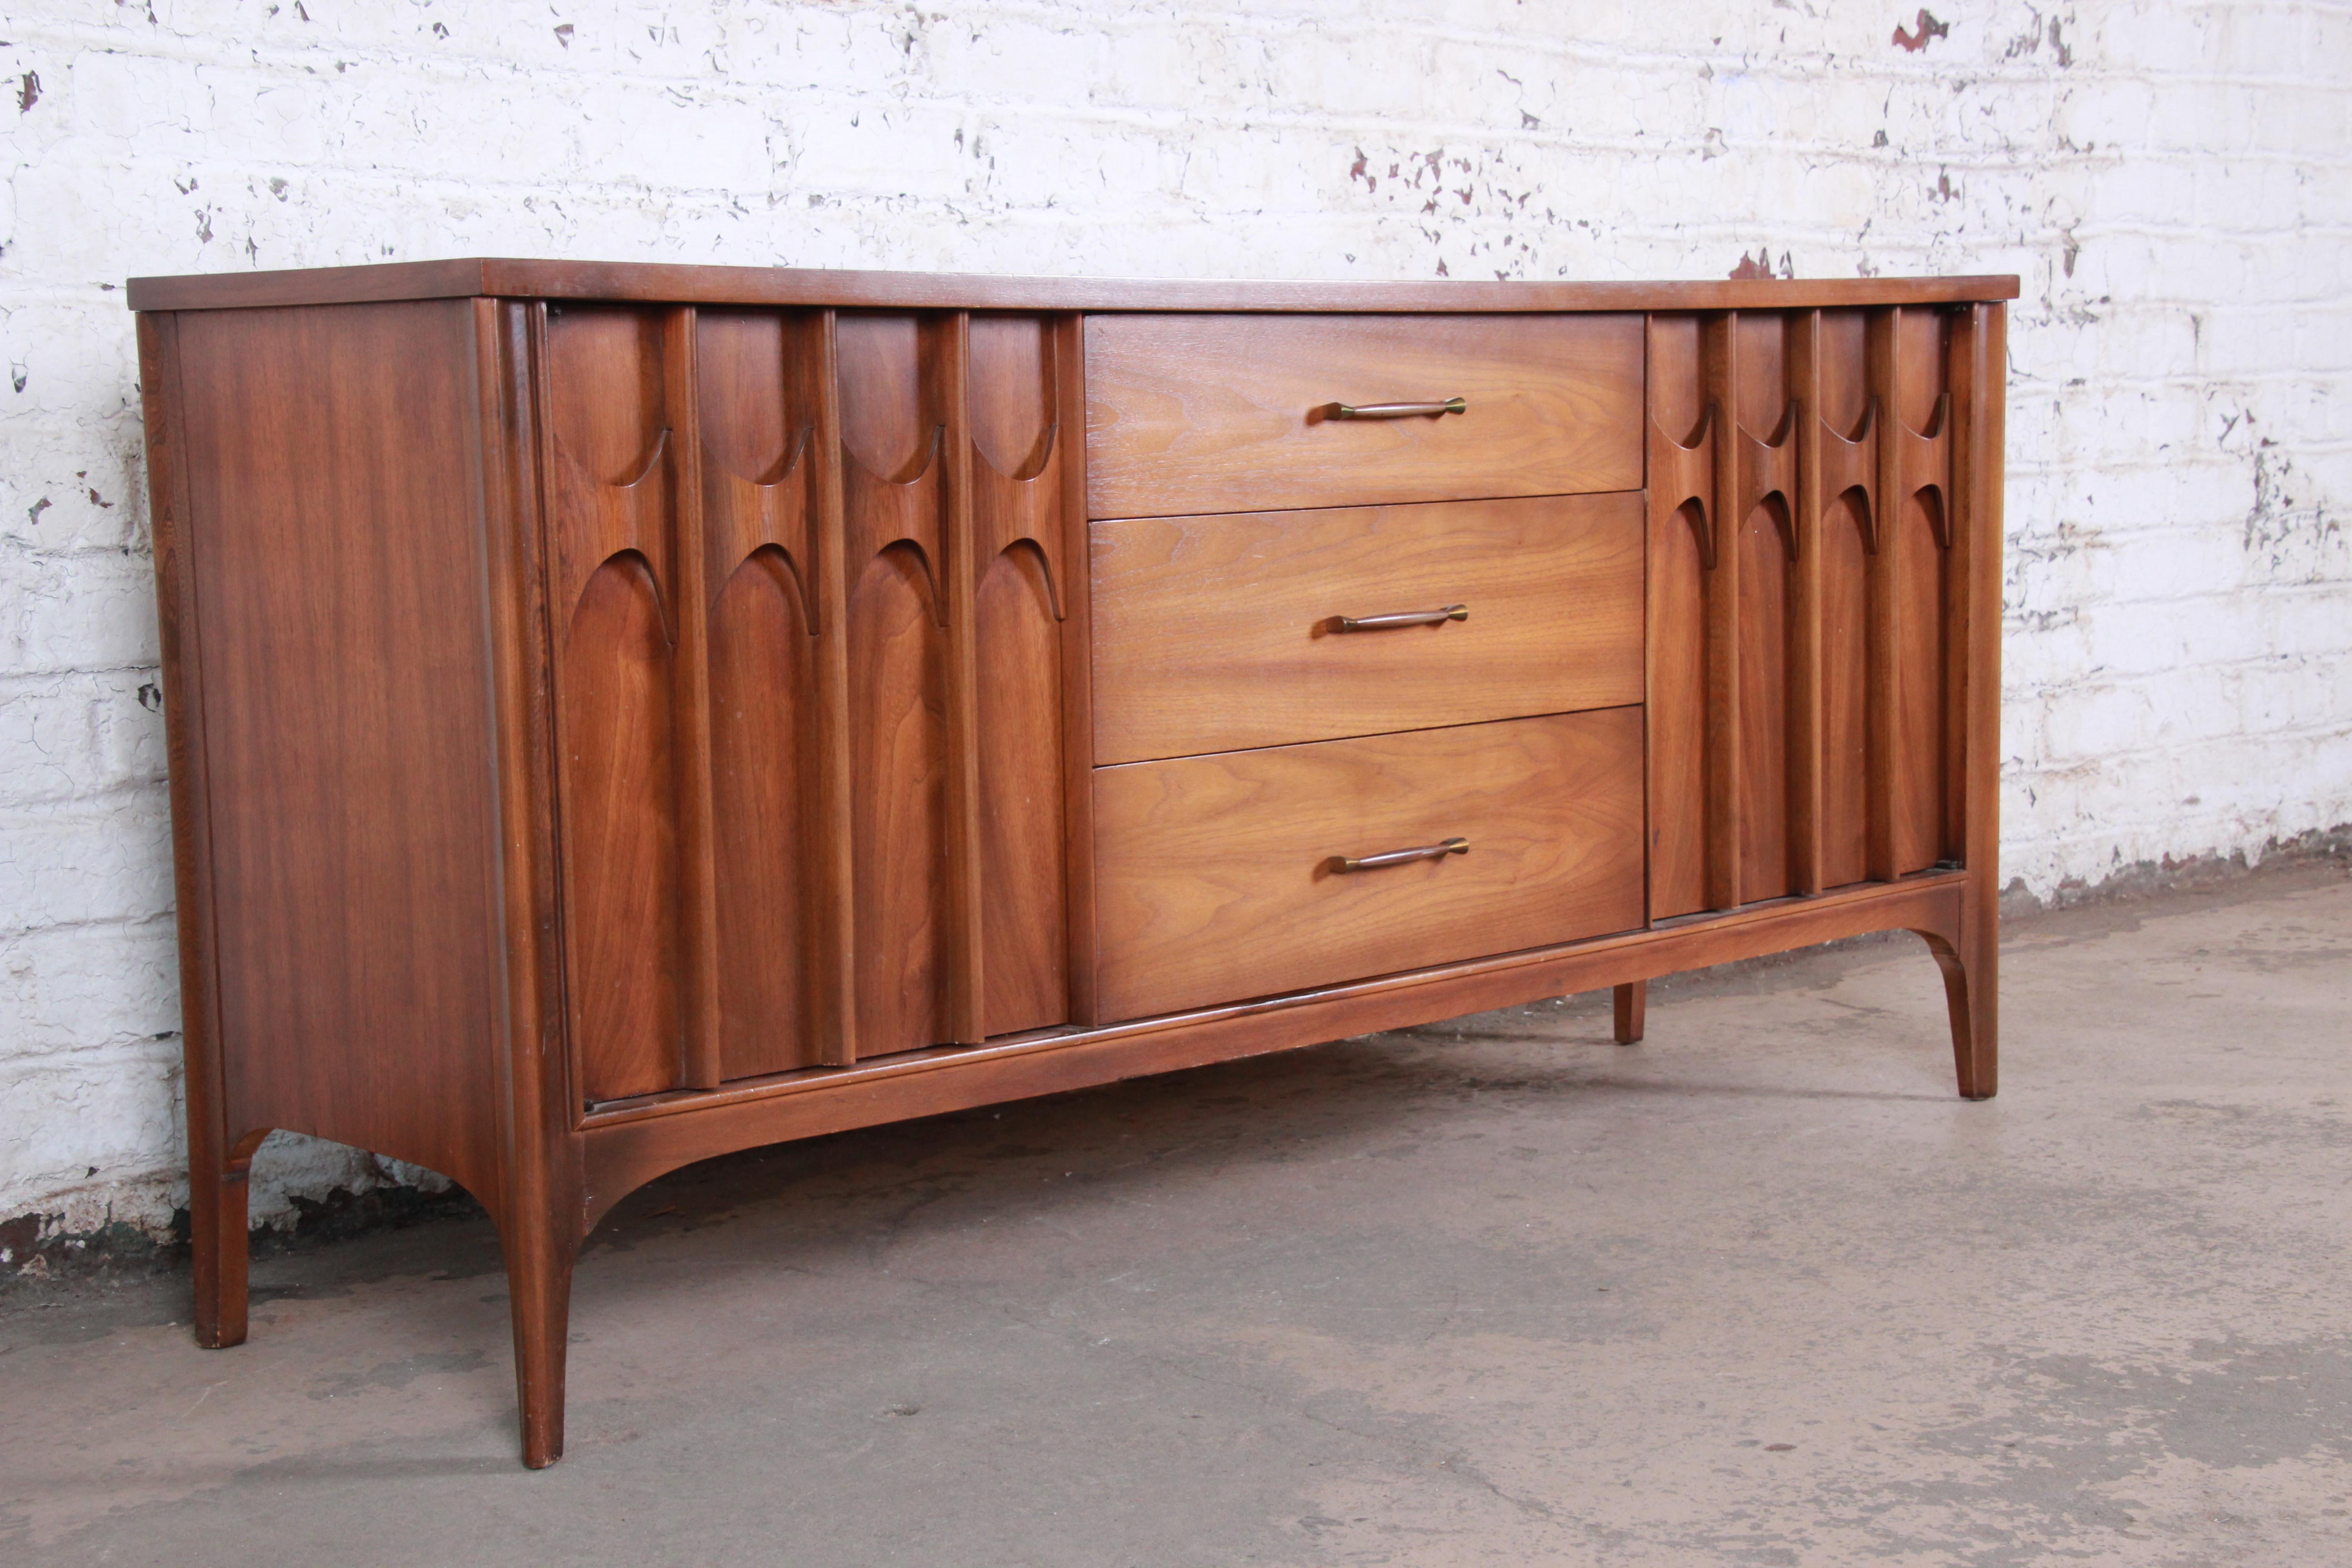 A gorgeous Mid-Century Modern credenza or sideboard from the Perspecta line by Kent Coffey. The credenza features stunning walnut wood grain with a sculpted arched rosewood design on the door fronts. It offers ample storage, with three dovetailed